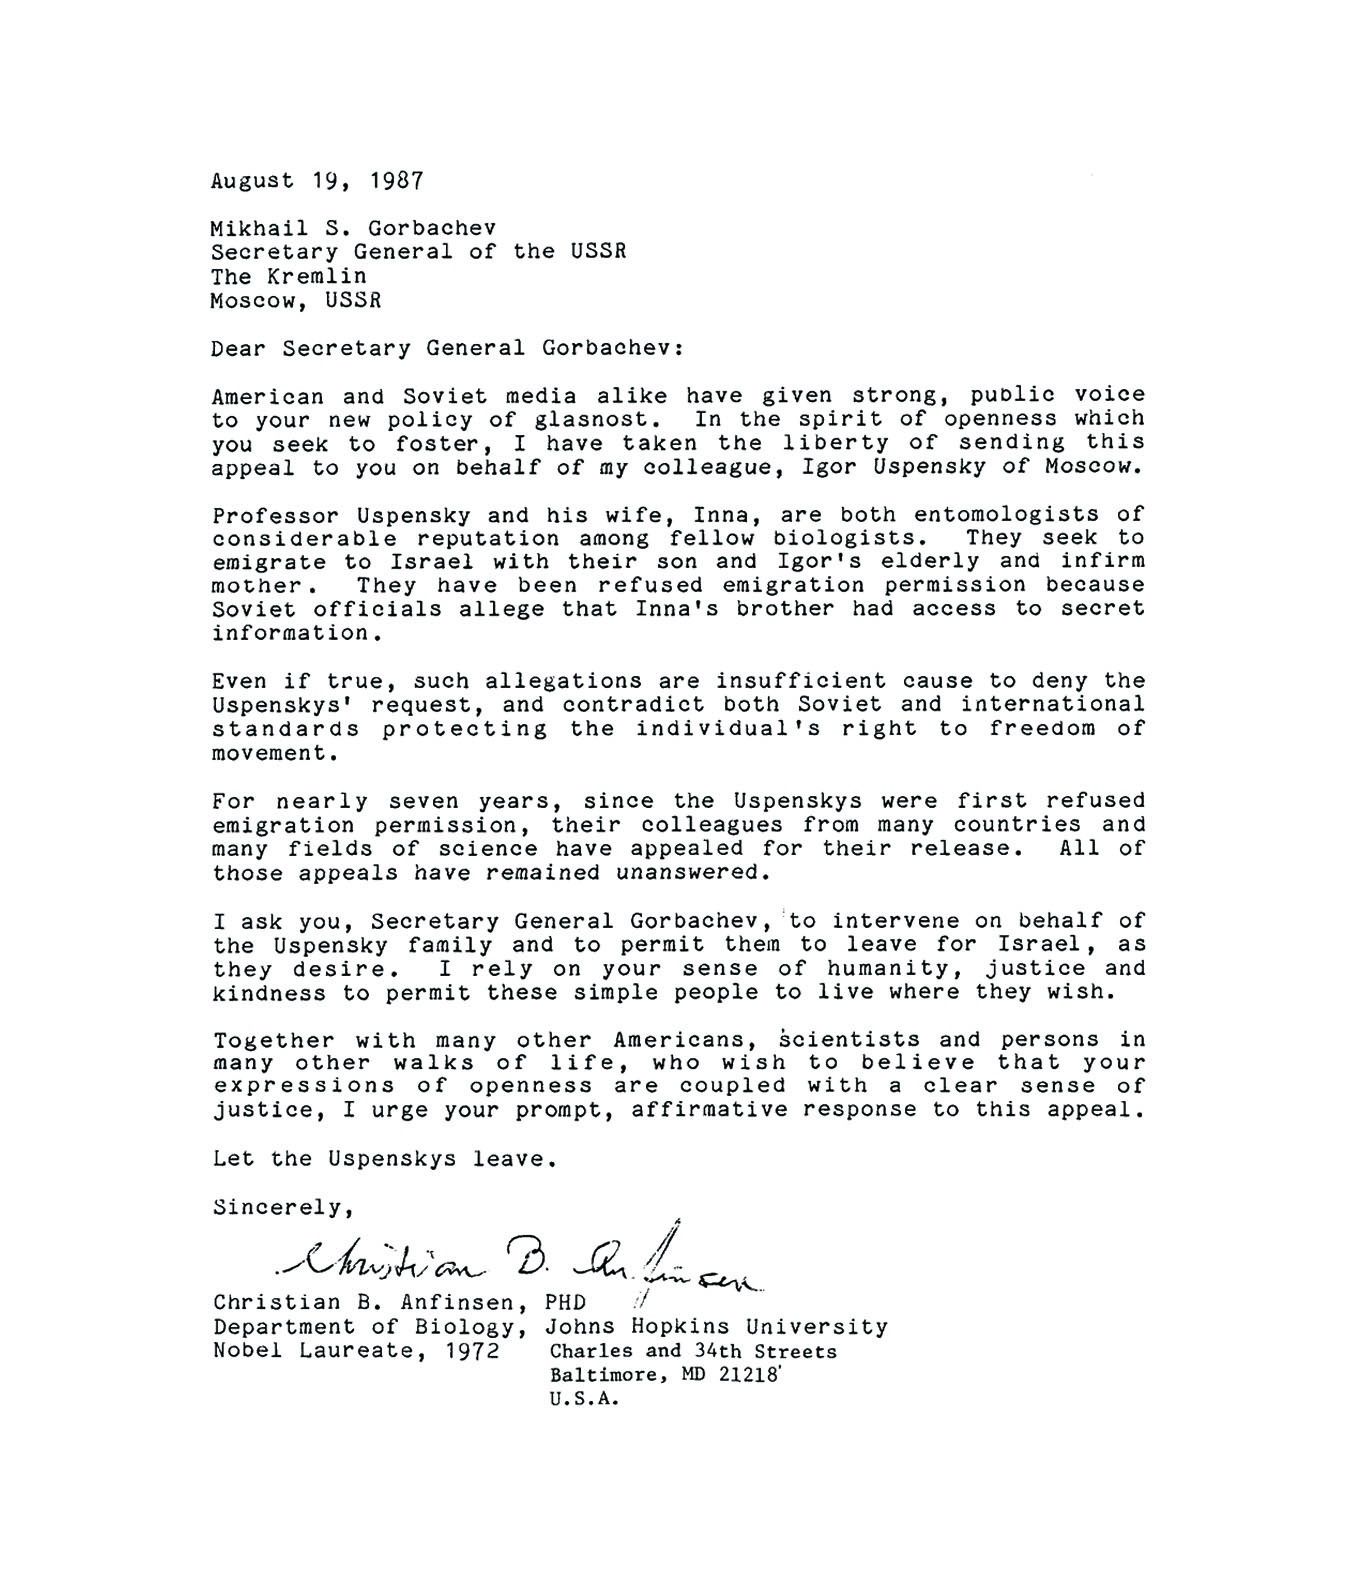 Letter penned by Dr. Anfinsen